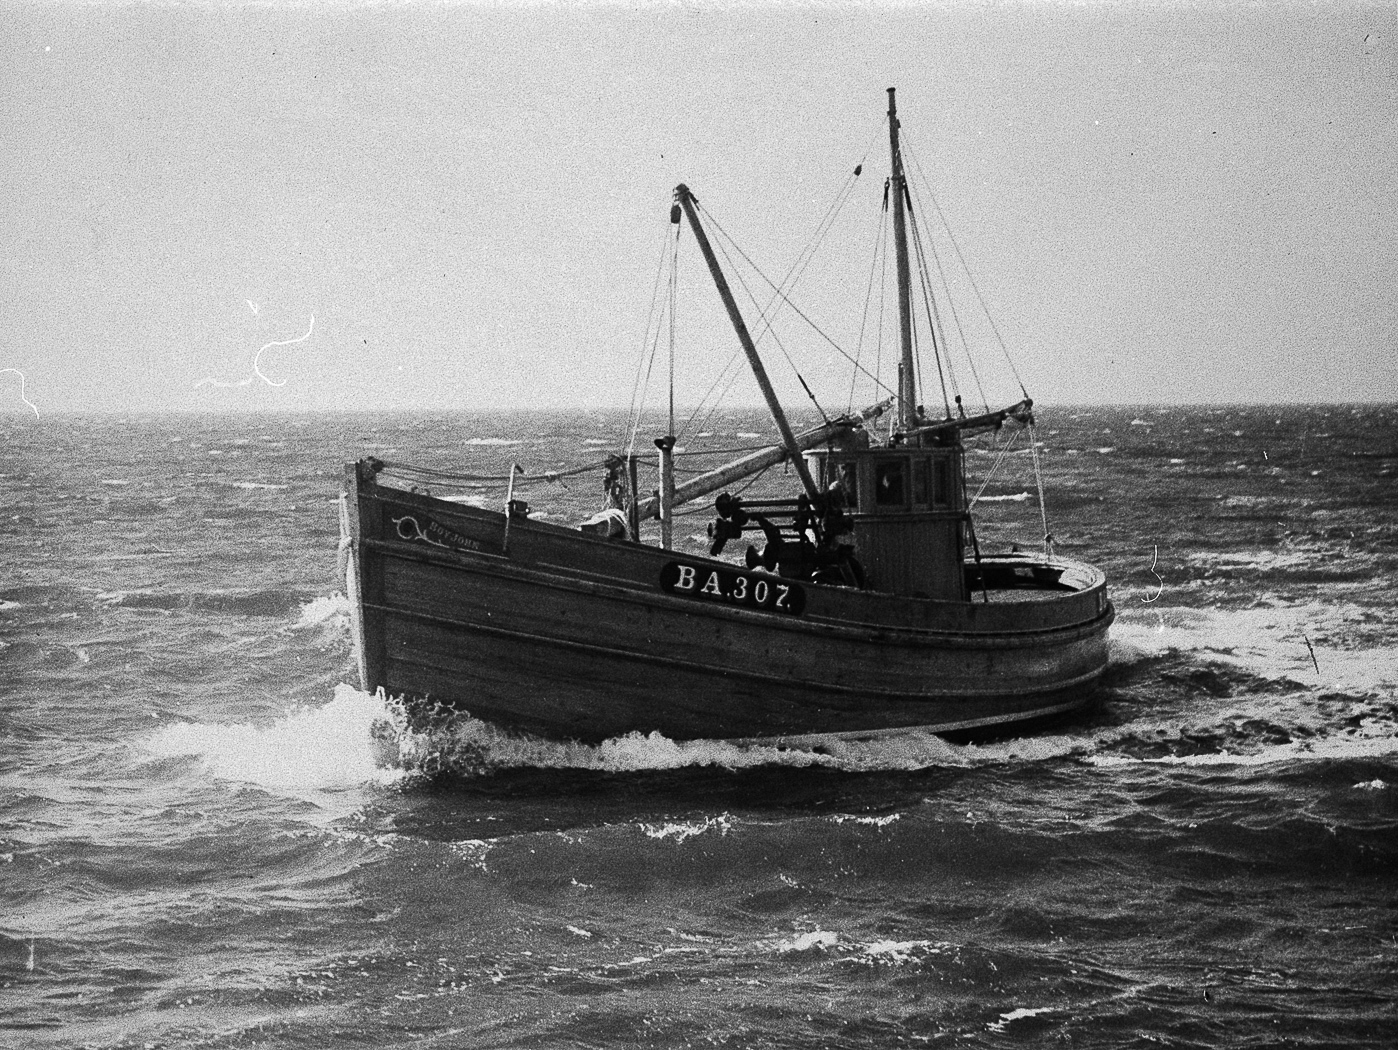 'Boy John', BA307, at sea, 1947. Weighing 23 tons and 50ft long, she was built by J.N. Miller boatbuilders, St Monans as a dual purpose ringnetter and seiner.